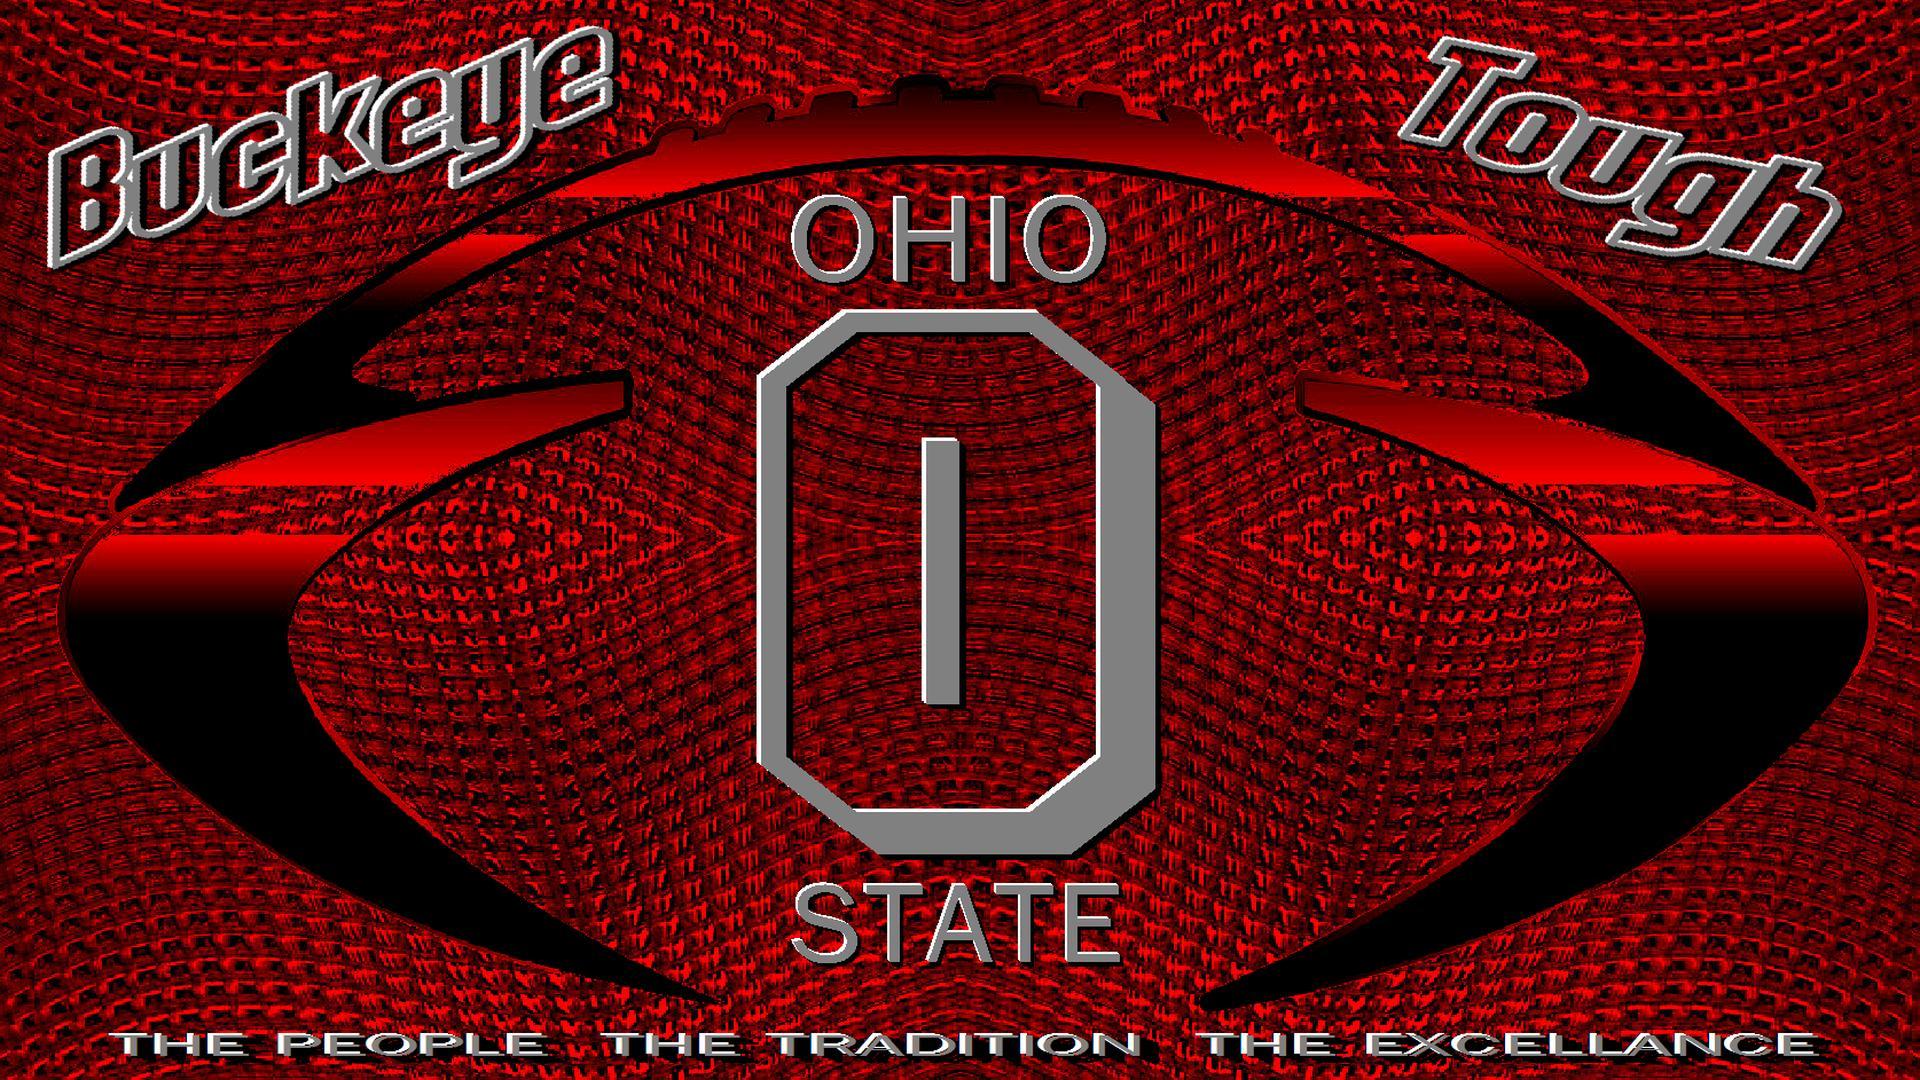 best image about OHIO STATE PHONE WALLPAPERS. HD